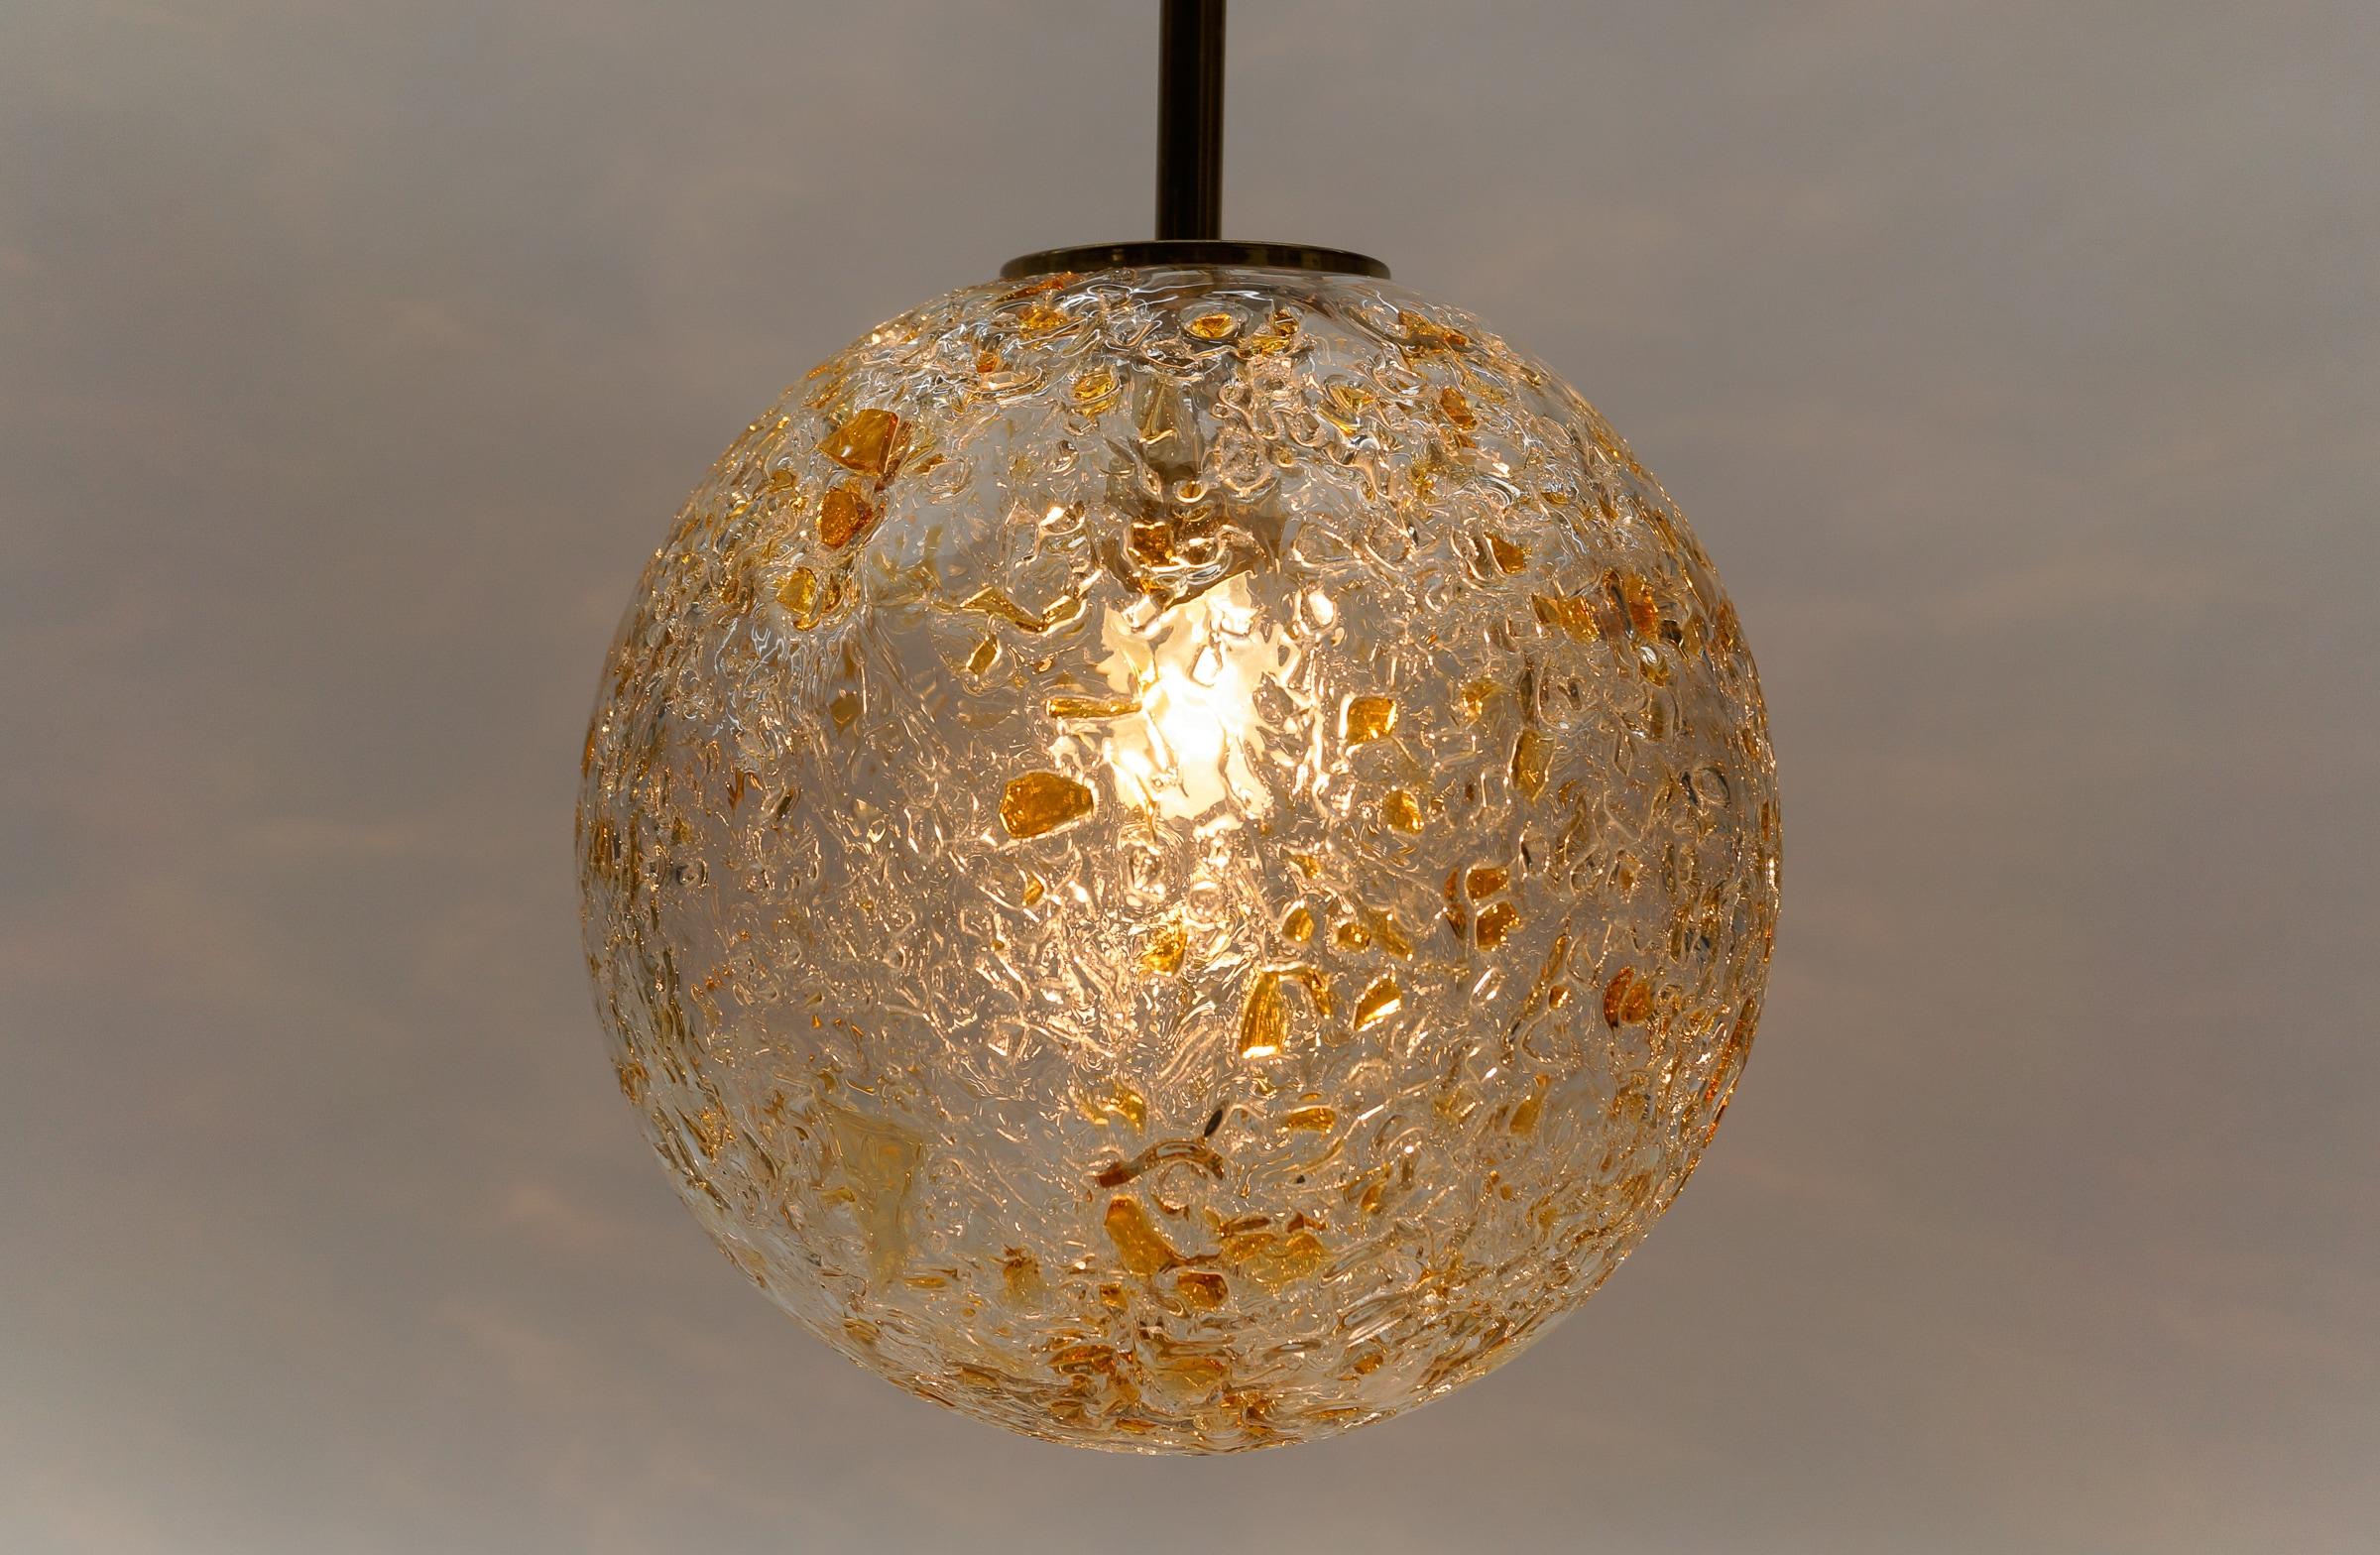 Lovely Mid-Century Modern Glass Ball Pendant Lamp by Doria, 1960s Germany For Sale 4